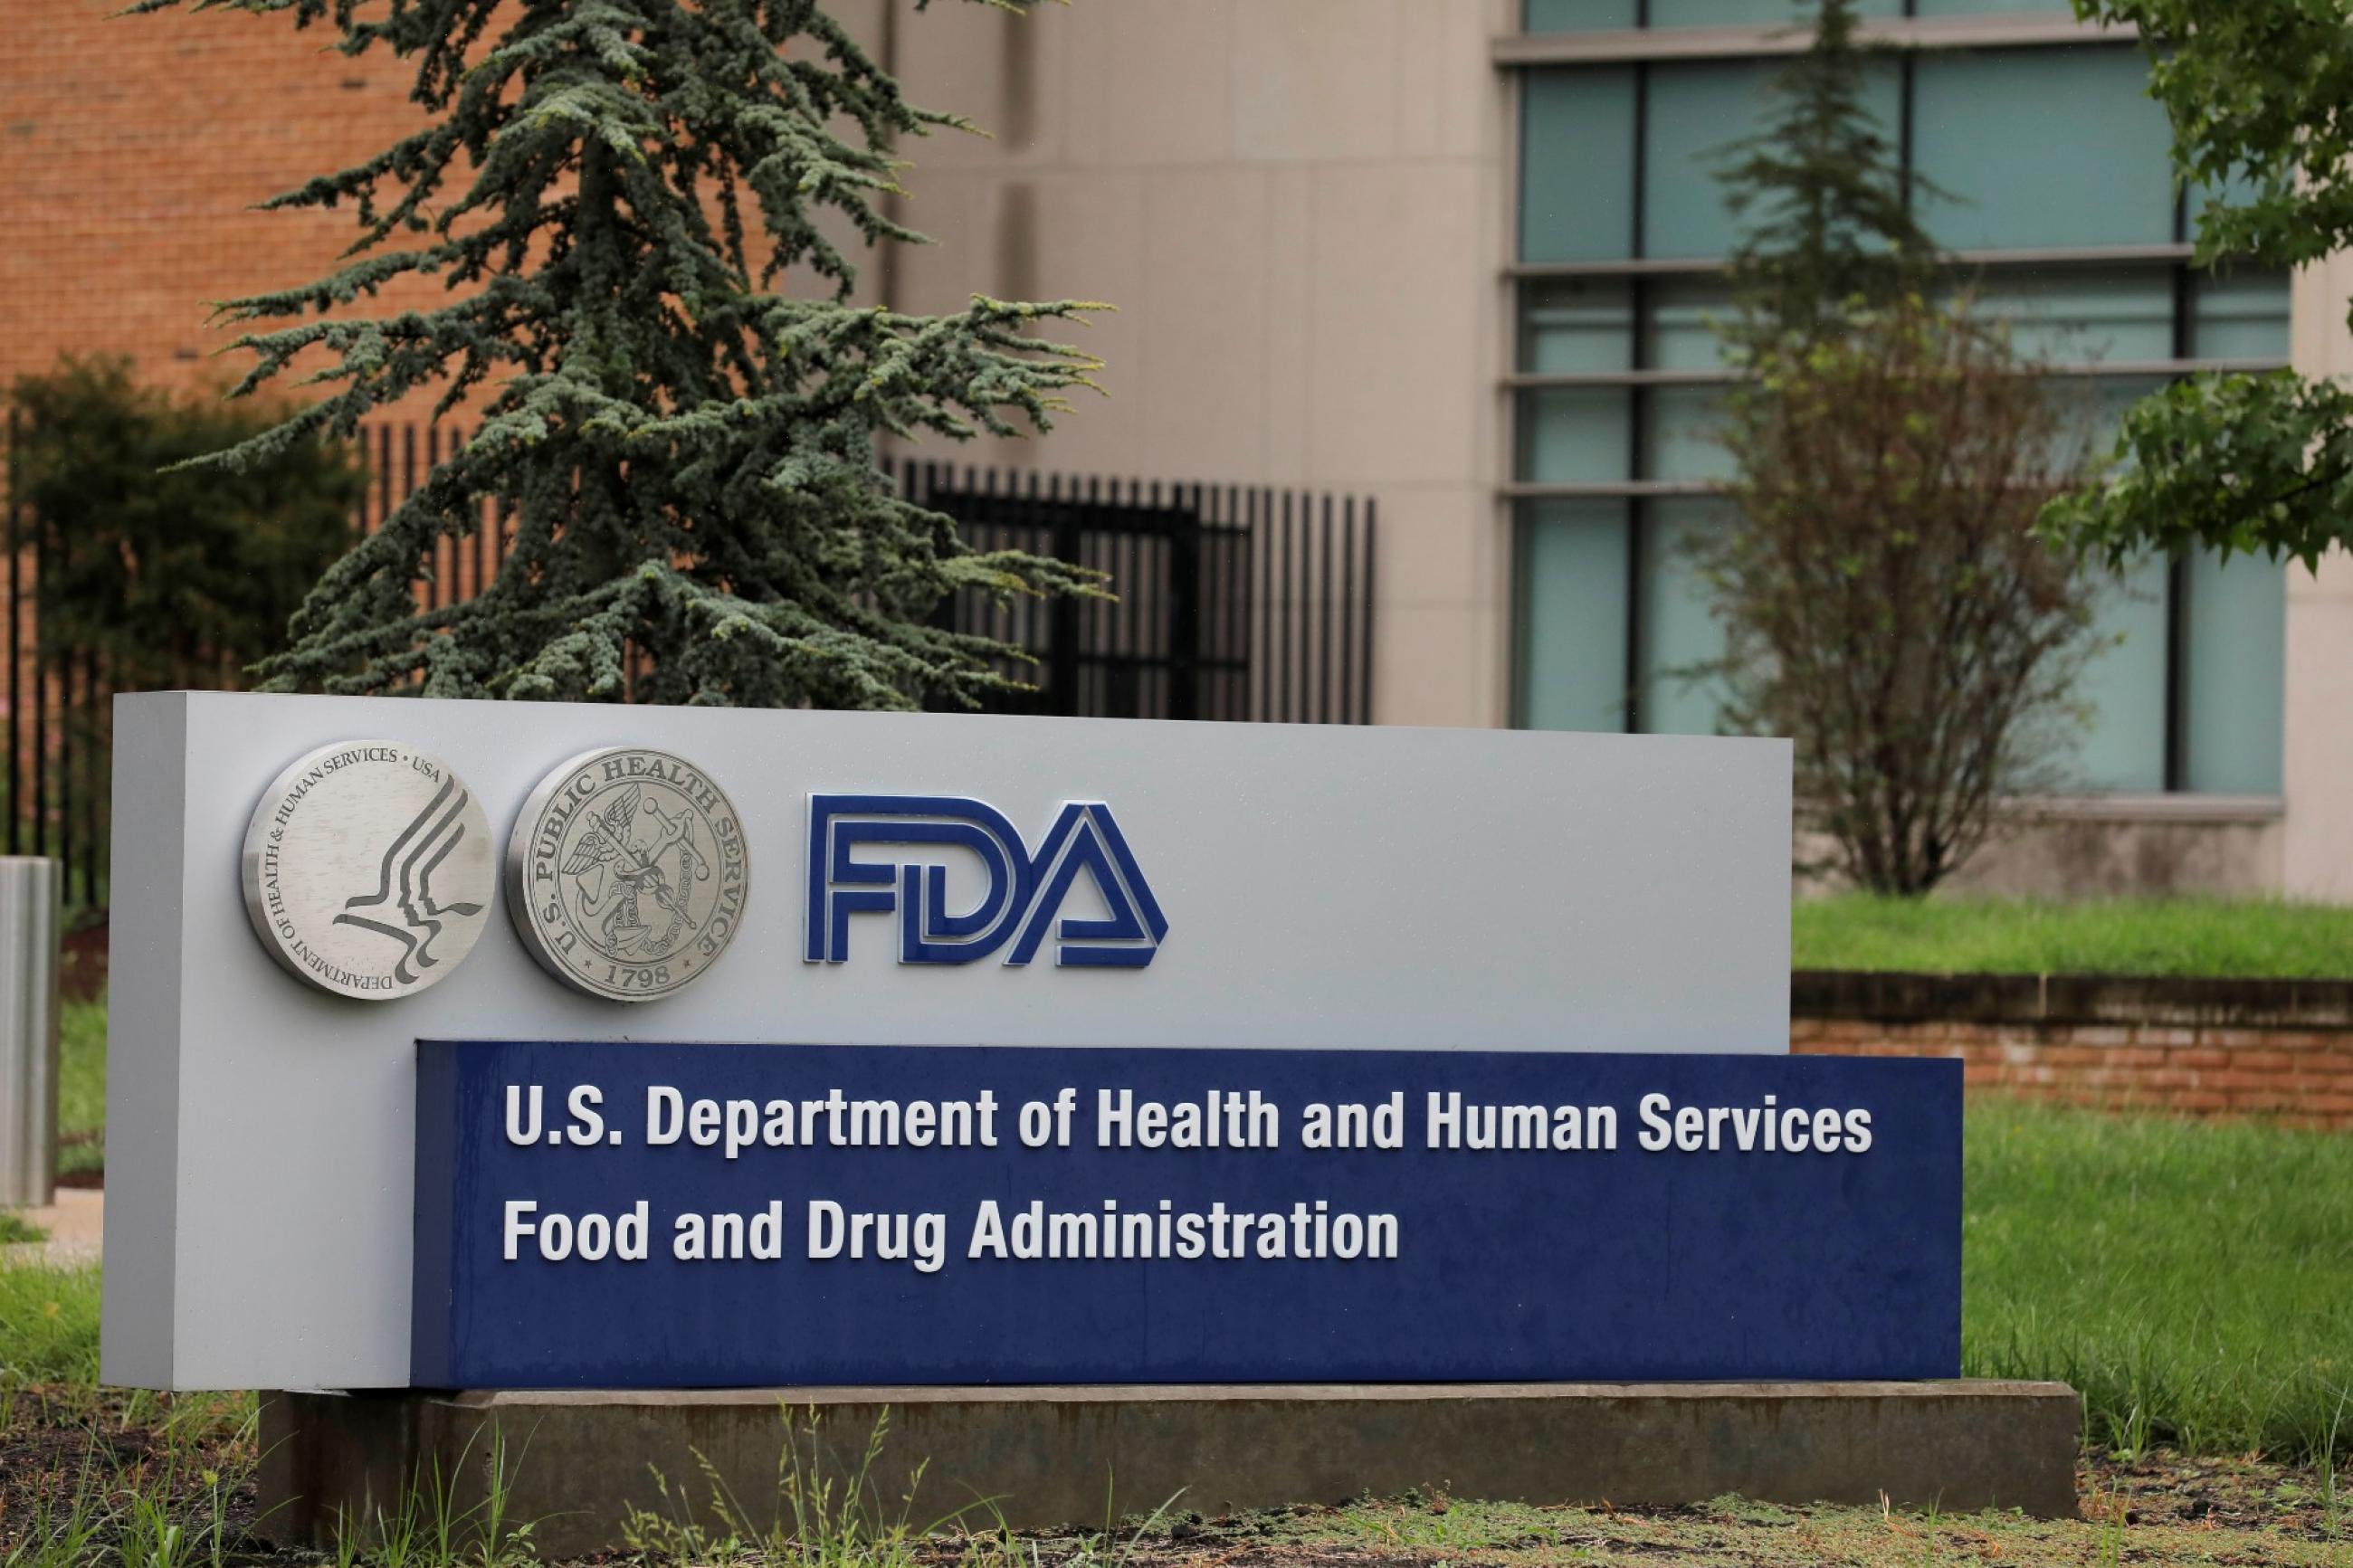 A blue and silver sign that reads "FDA: U.S. Department of Health and Human Services Food and Drug Administration" is seen in the lawn outside the FDA building in Maryland